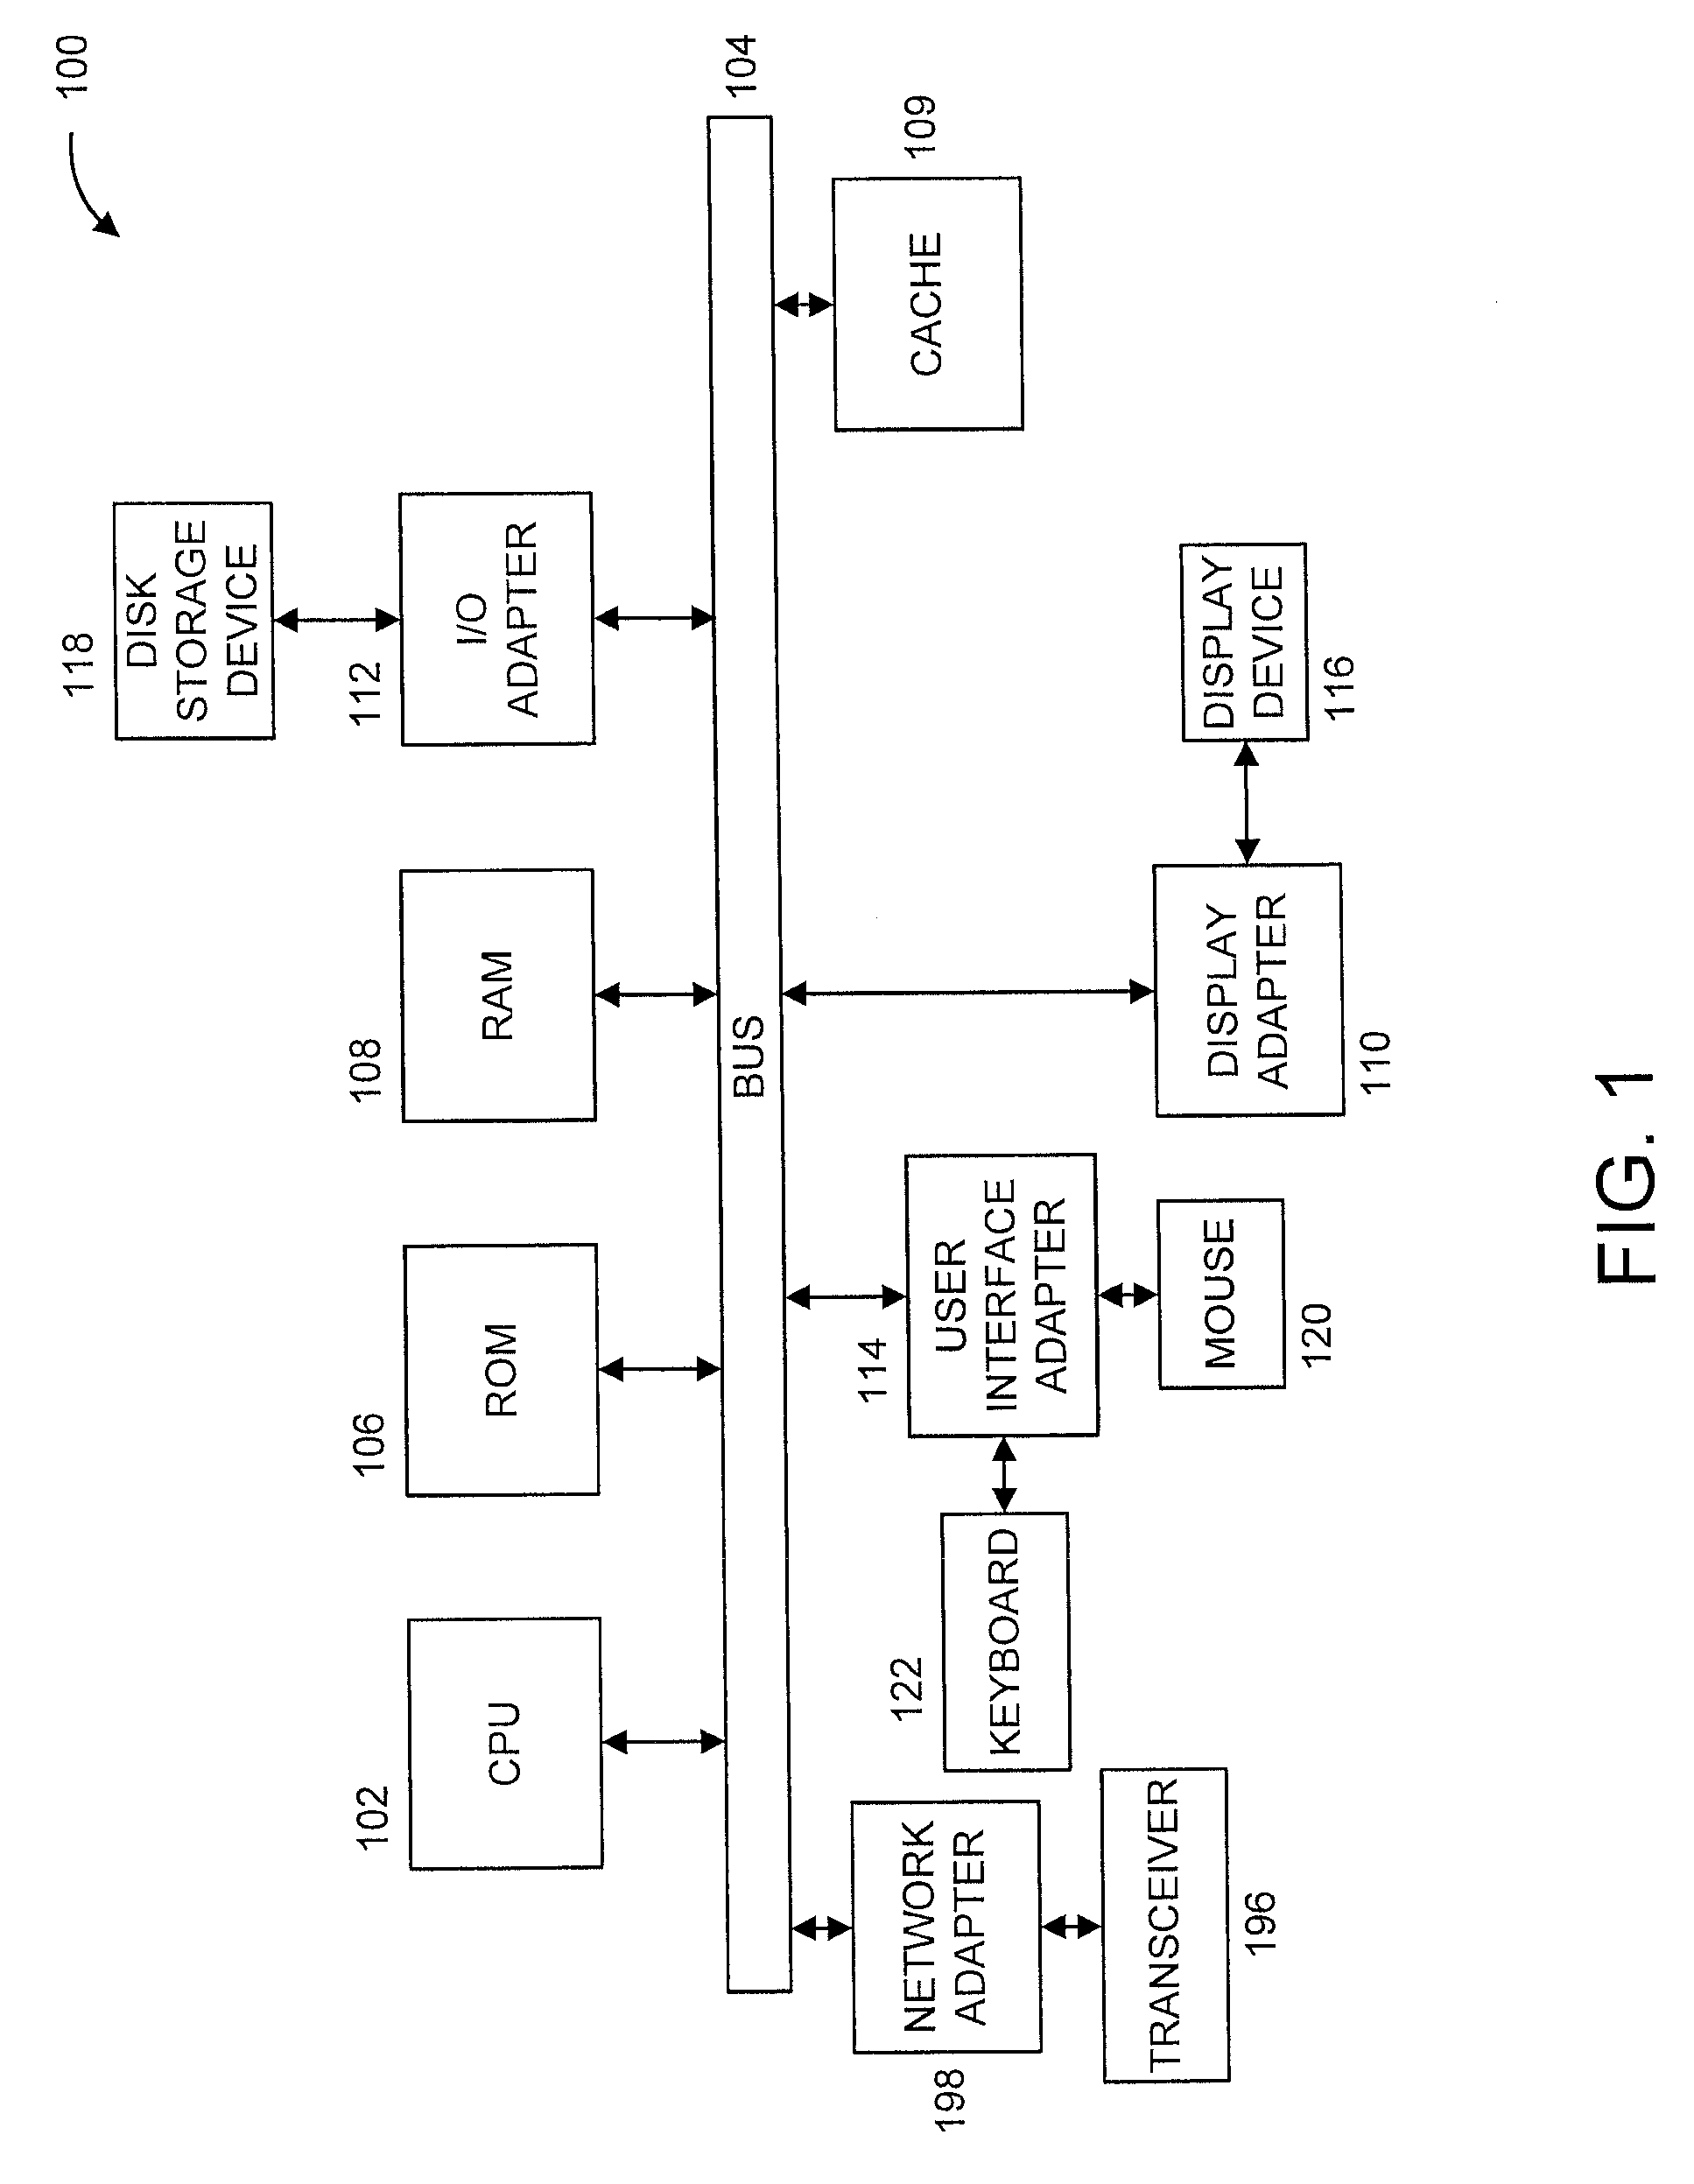 Linking graphical user interface testing tools and human performance modeling to enable usability assessment